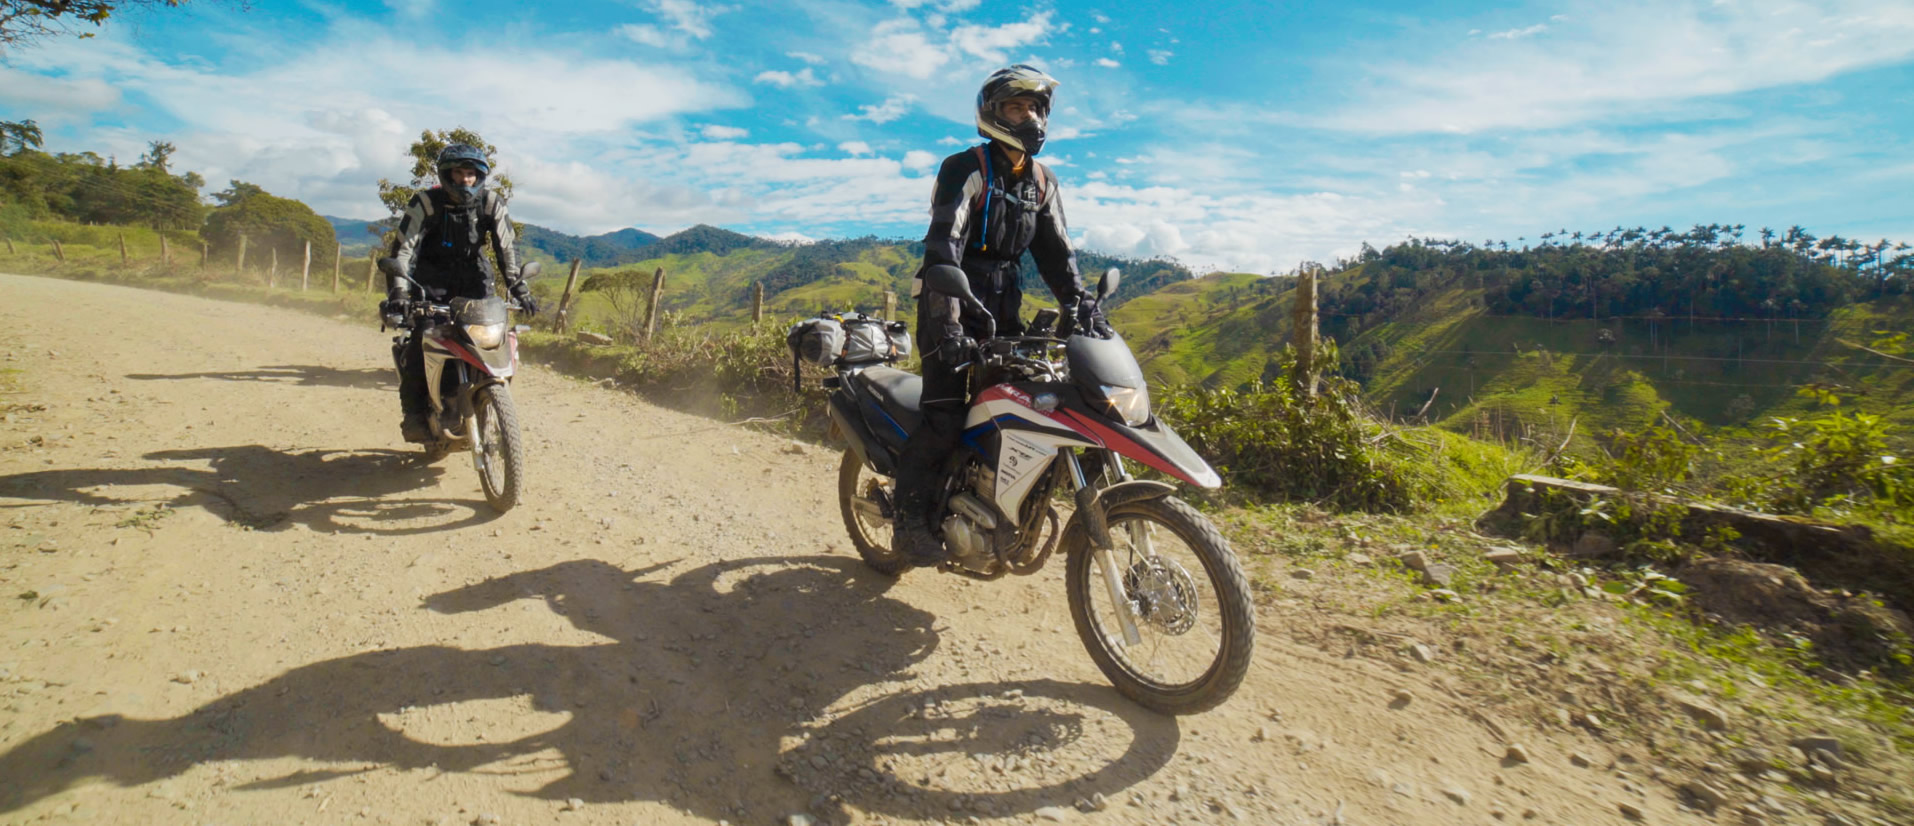 1354-Motorcycle Tours Colombia6_Edited3.jpg